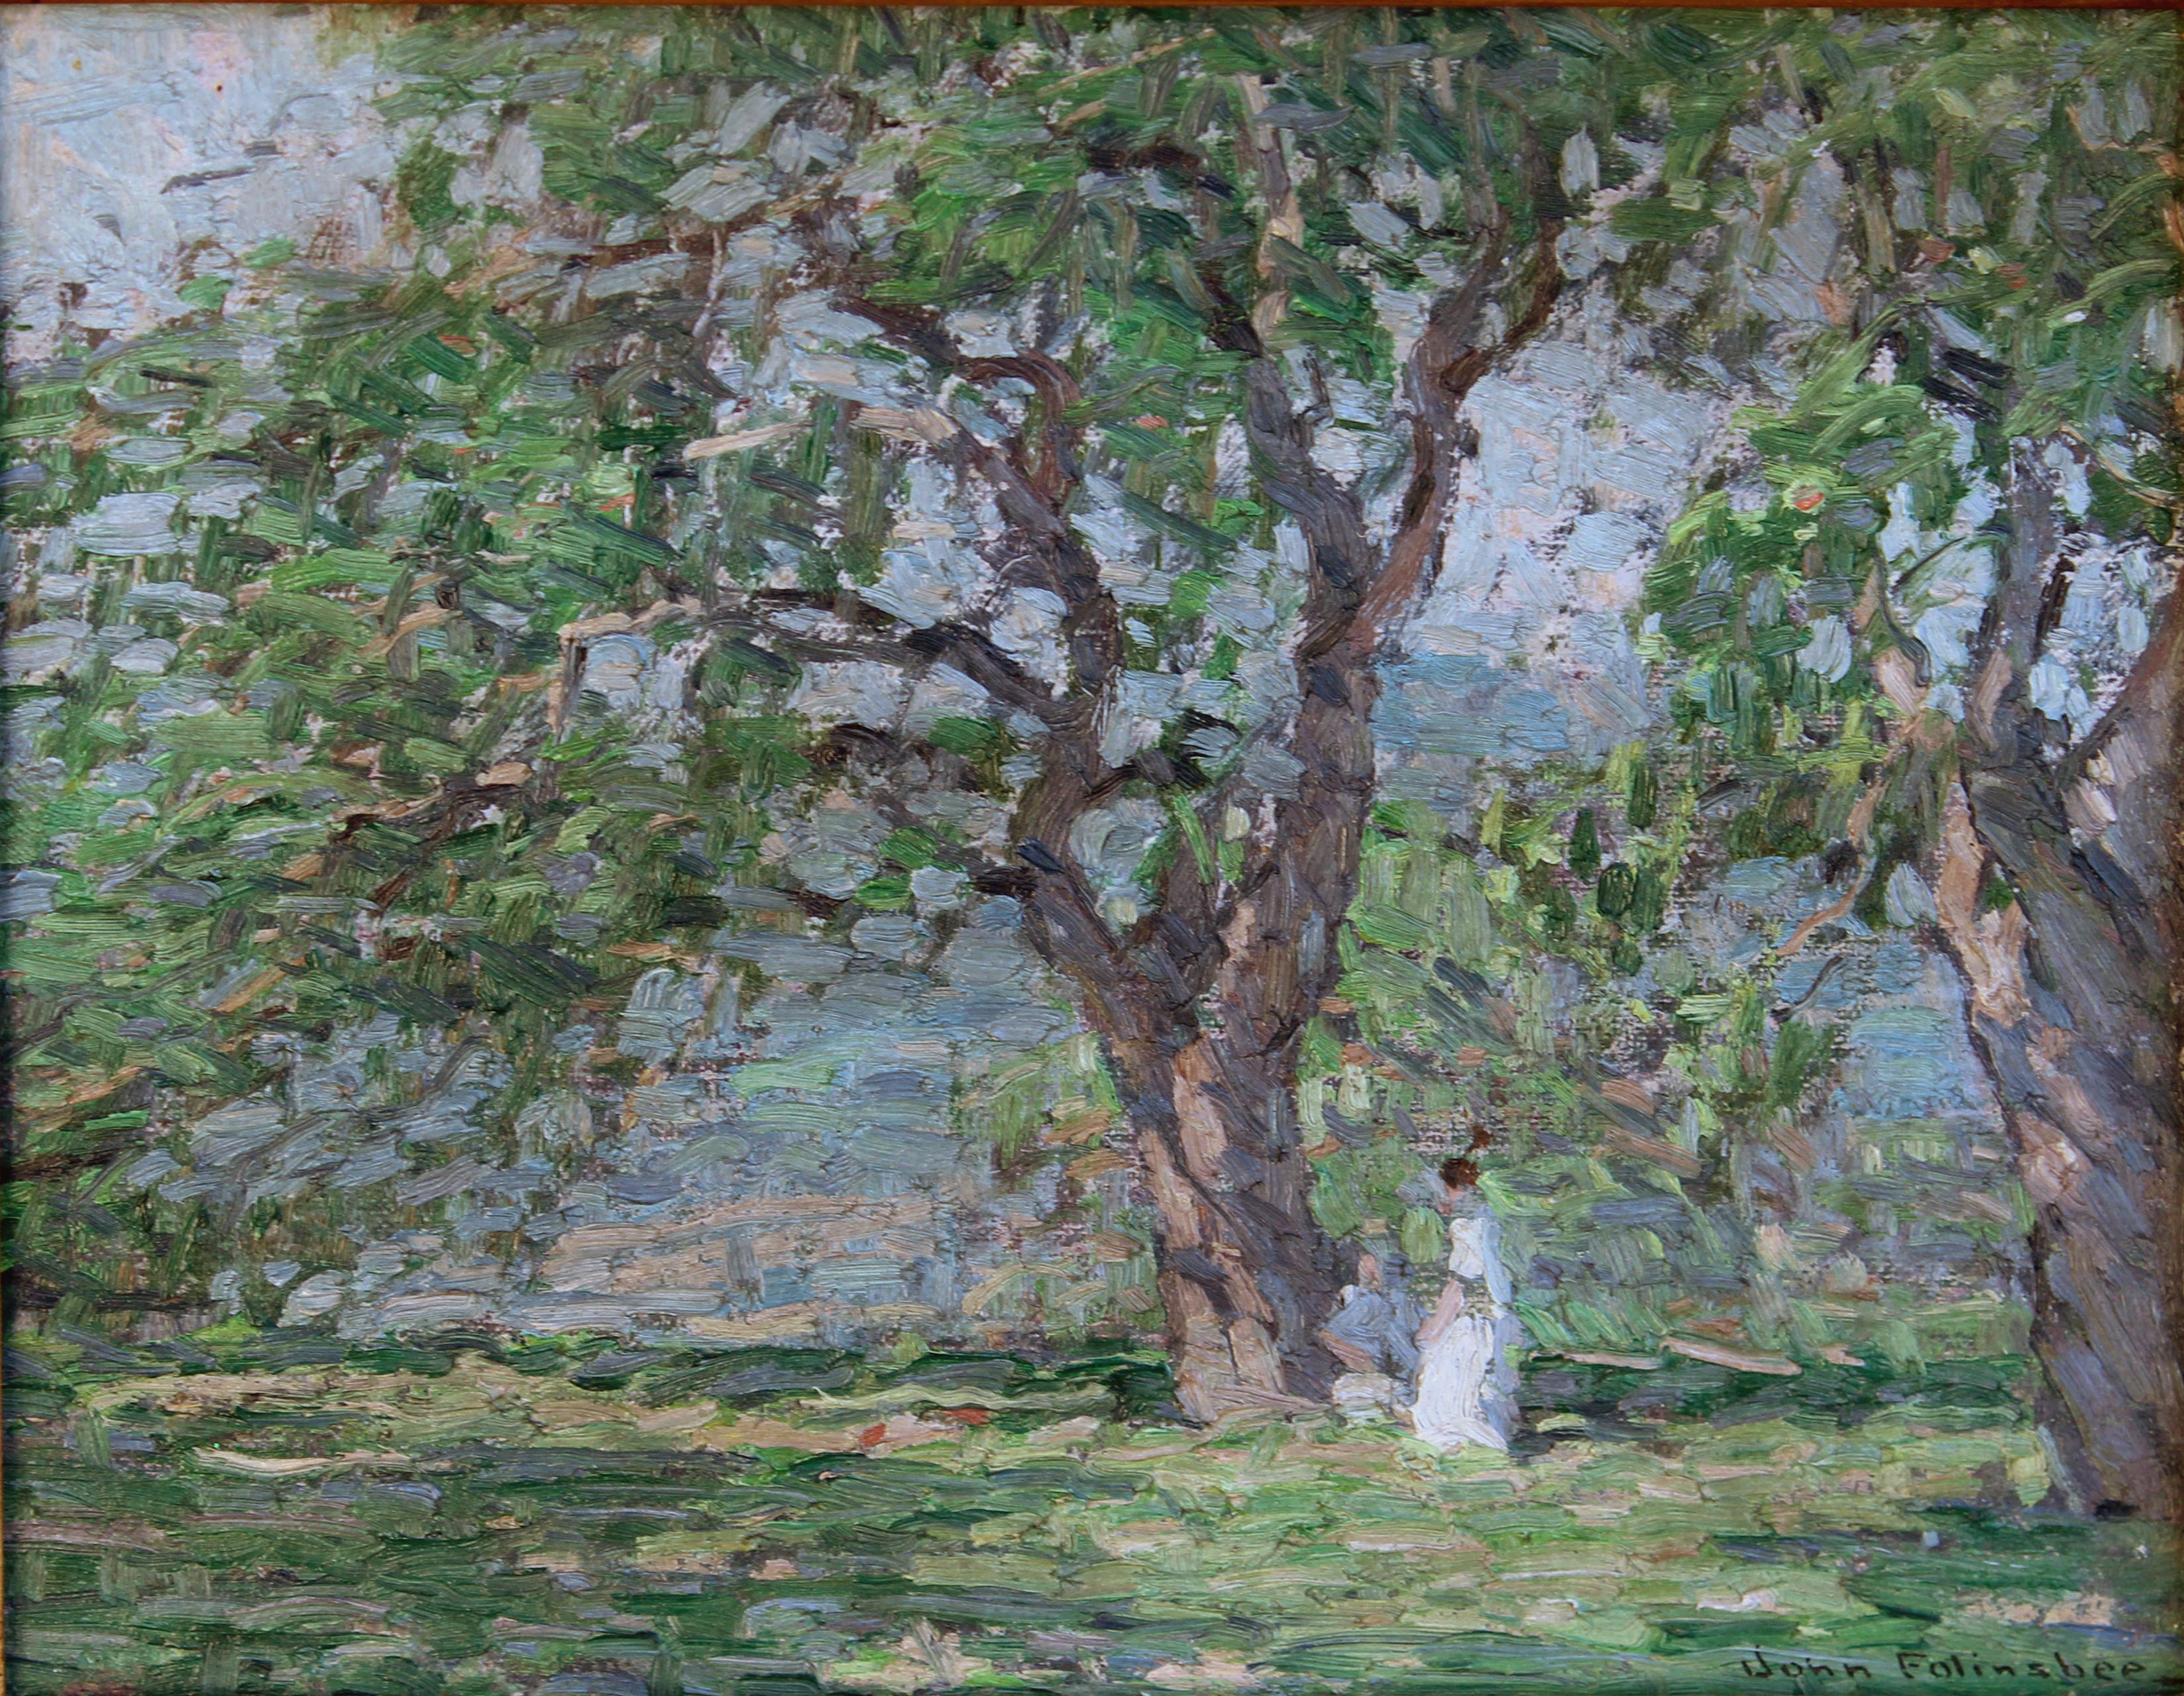 The Orchard: „In The Orchard“ (Amerikanischer Impressionismus), Painting, von John Fulton Folinsbee